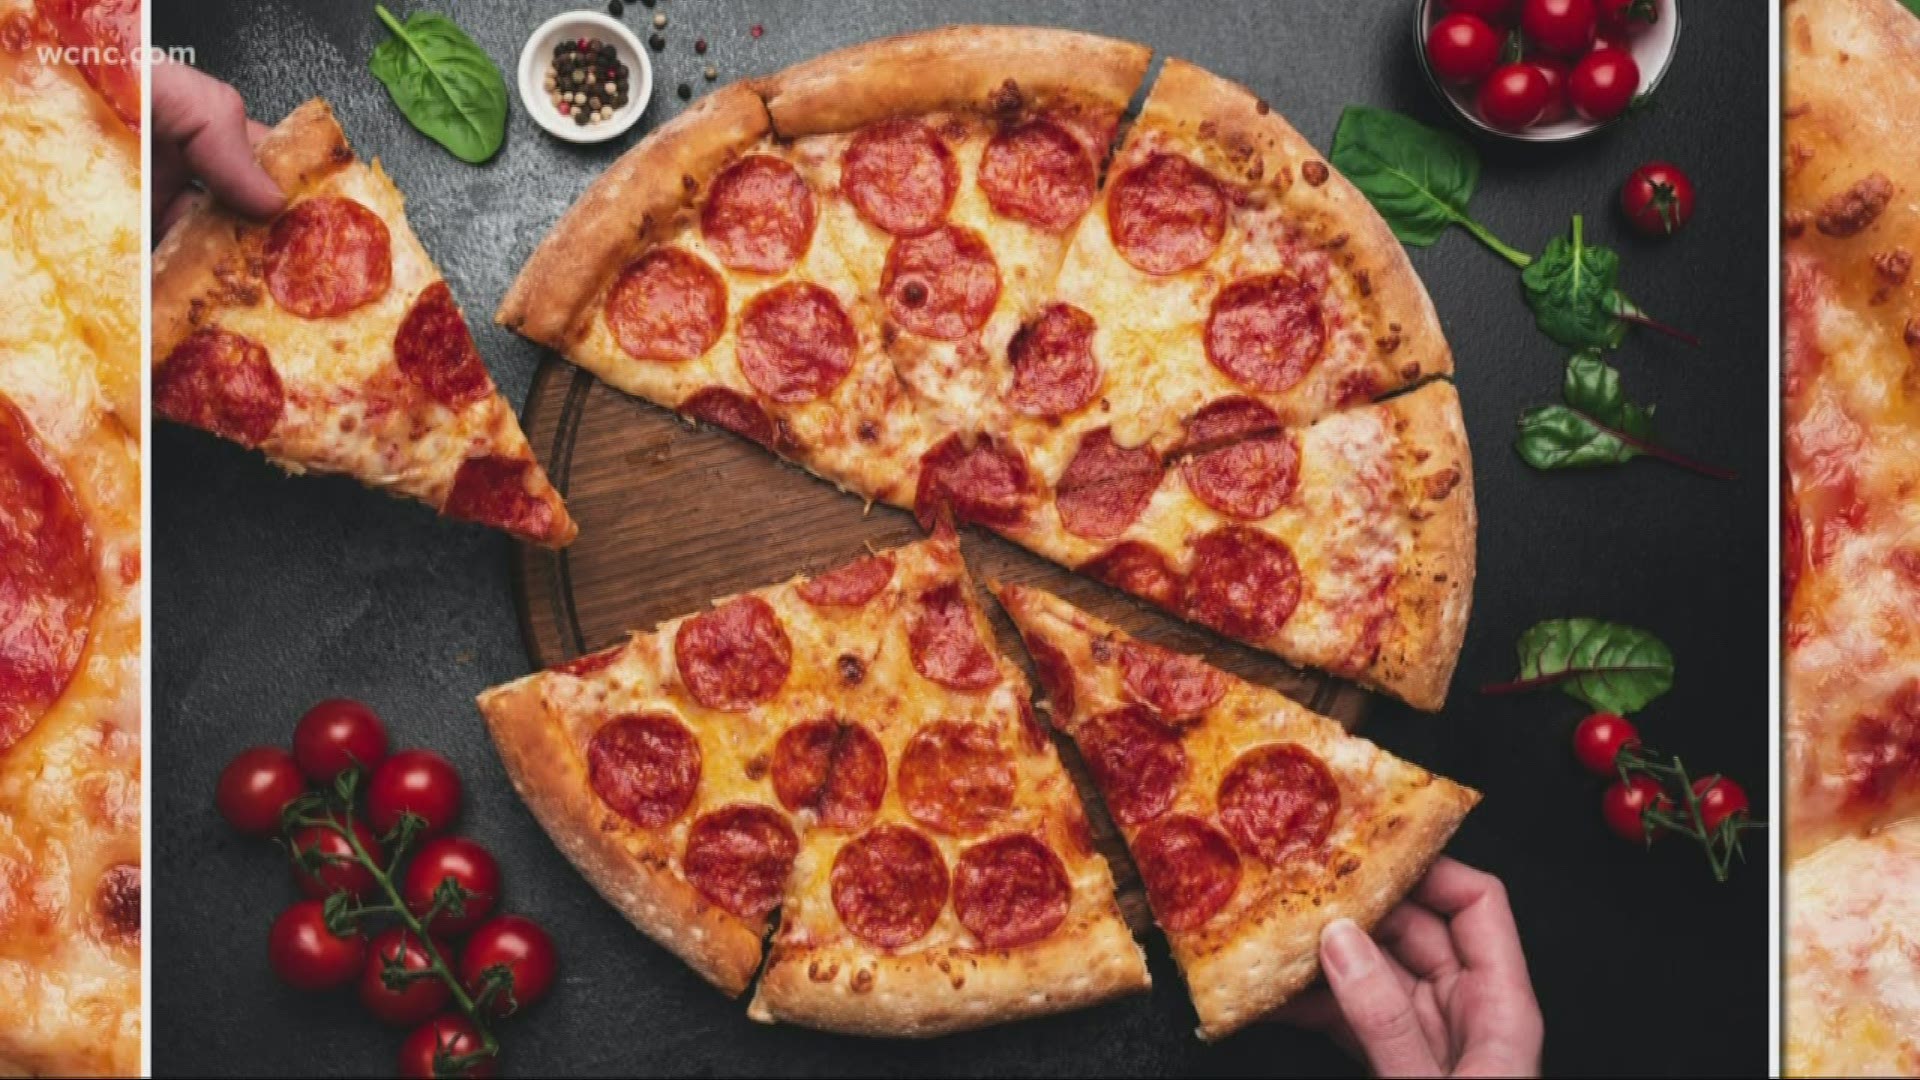 Who knew your favorite pie was so dangerous? In 2018, 3,800 people went to the emergency room for pizza-related injuries.